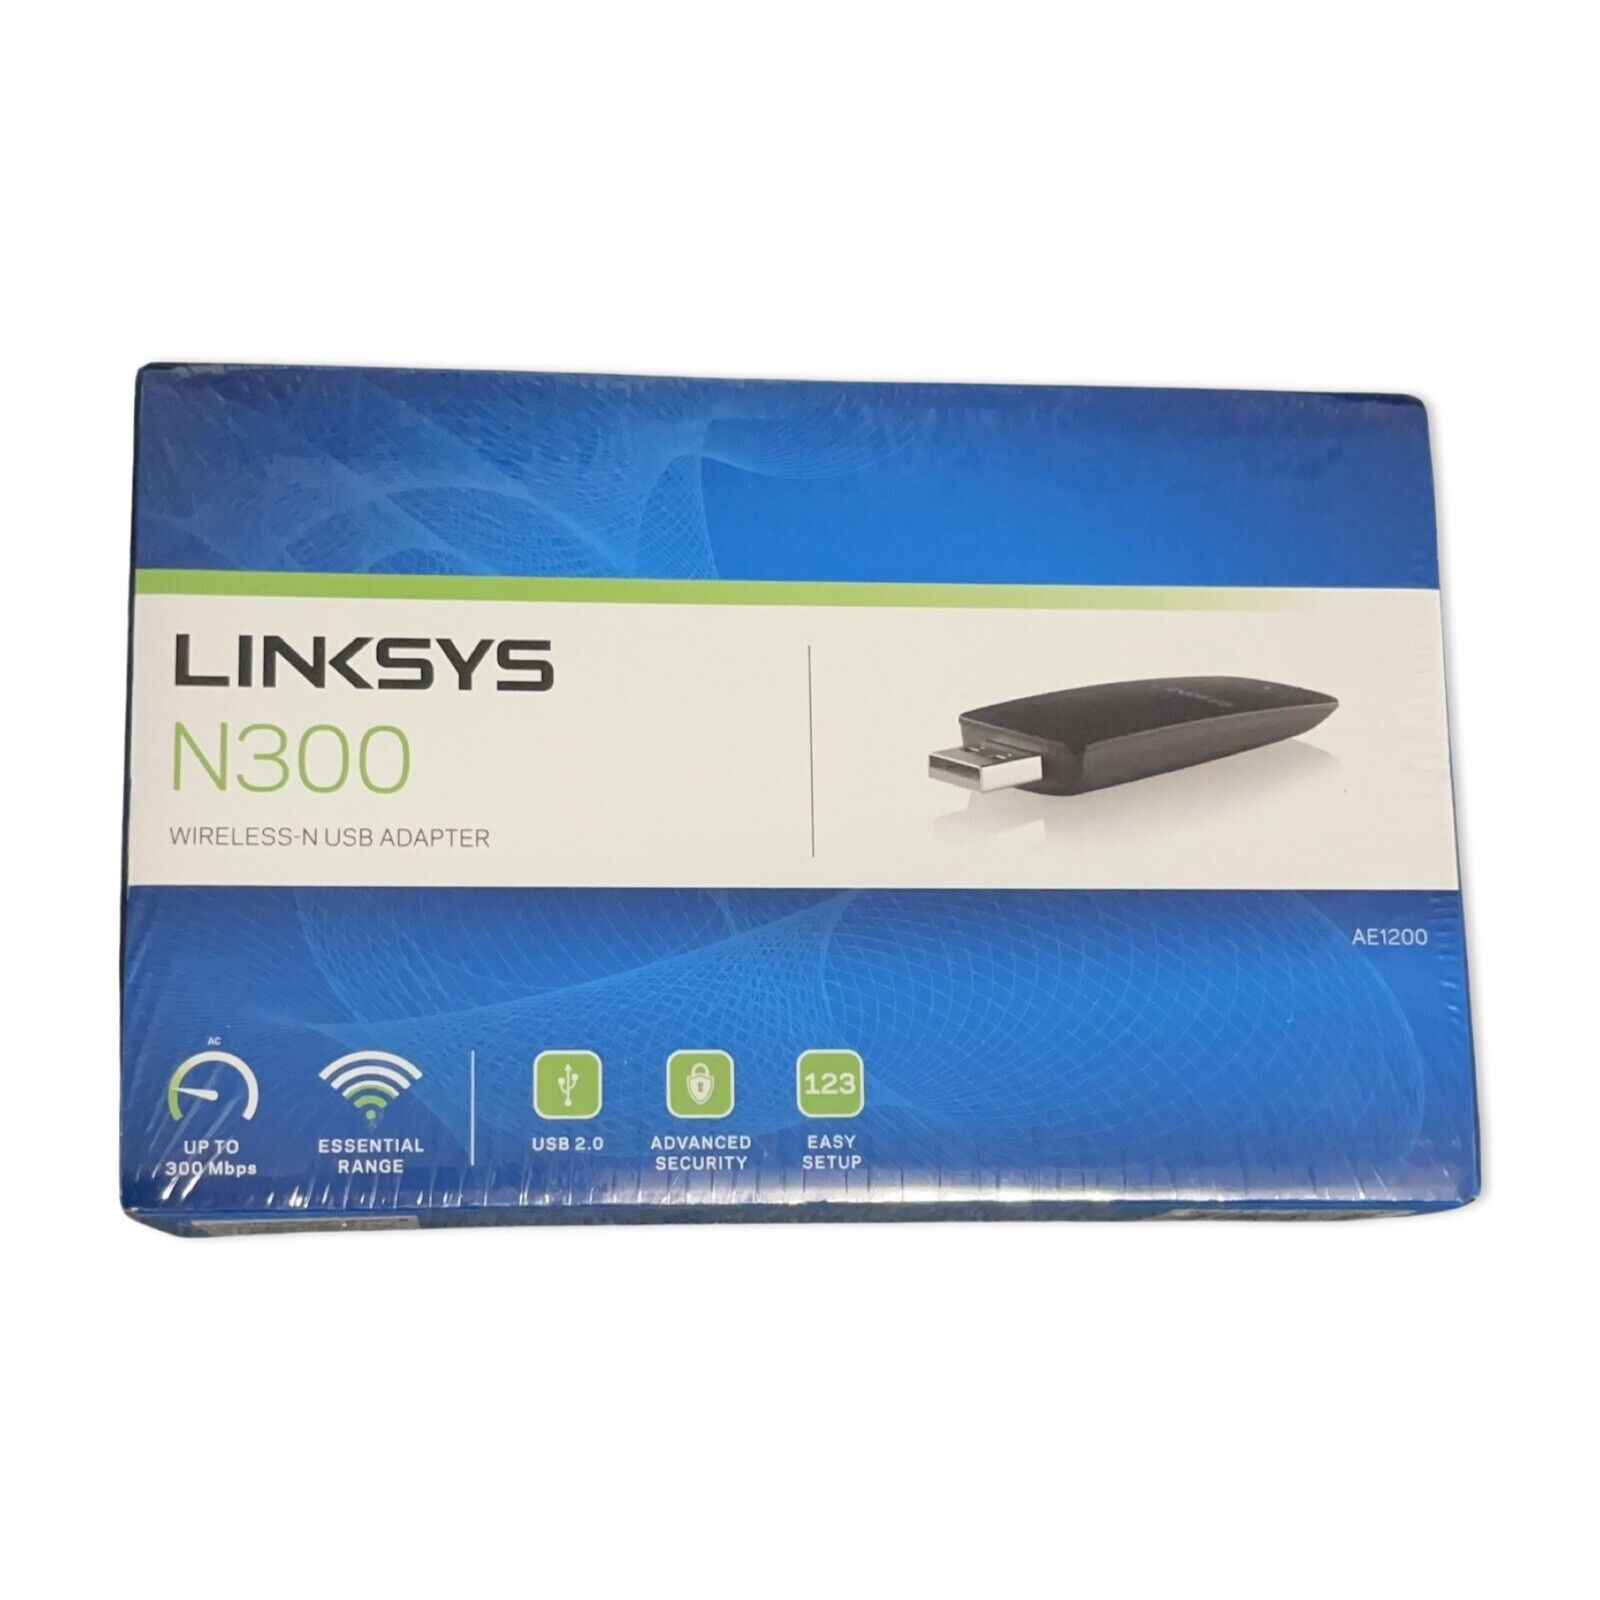 Linksys Wireless-N USB Adapter N300 AE1200-NP 300Mb 2.4Ghz Reliable Network Easy